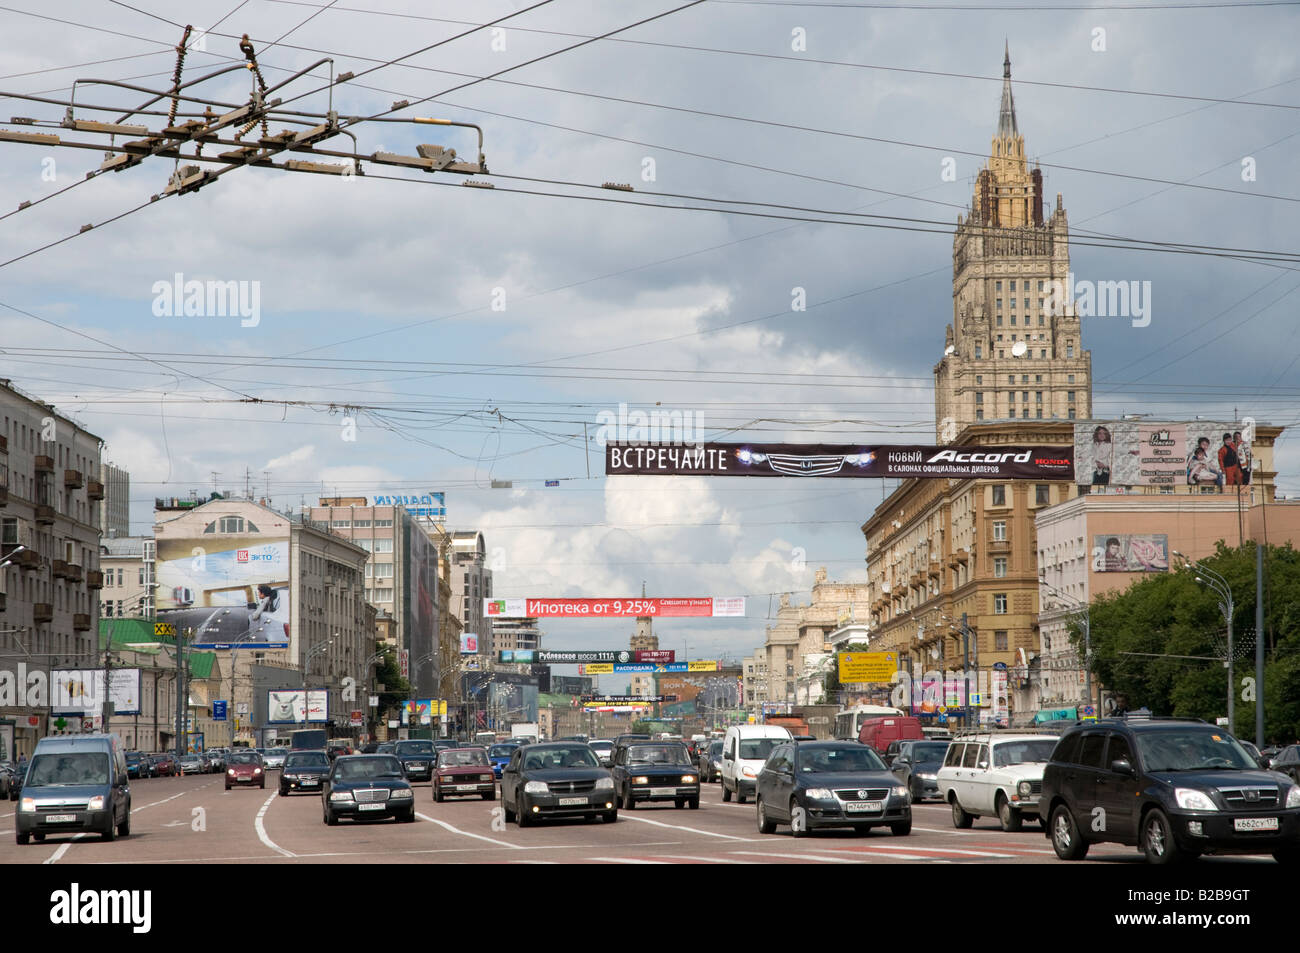 Traffic on one of the ring roads, Smolensky Bulvar, Moscow, Russia Stock Photo